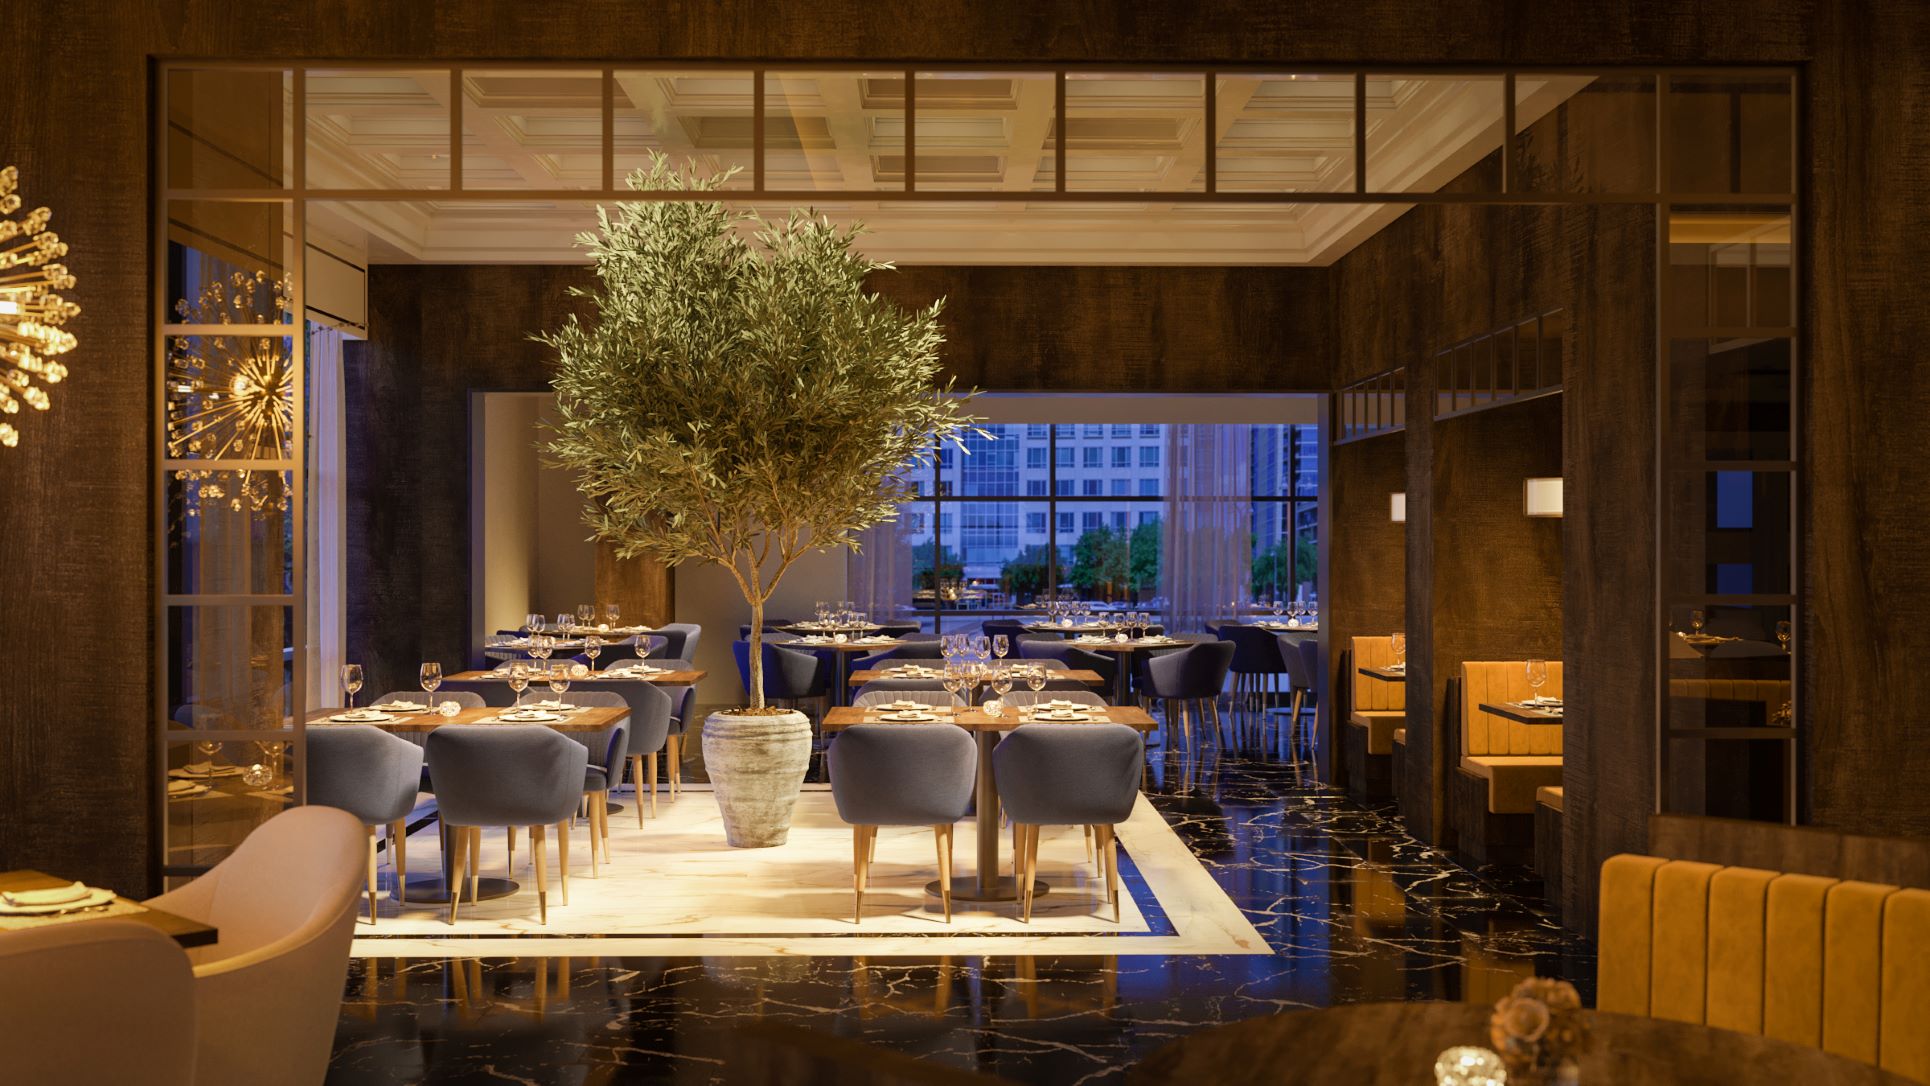 rendering of the main dining room in Plano with a view of booths, tables and chairs, a large interior tree and a view out of the windows